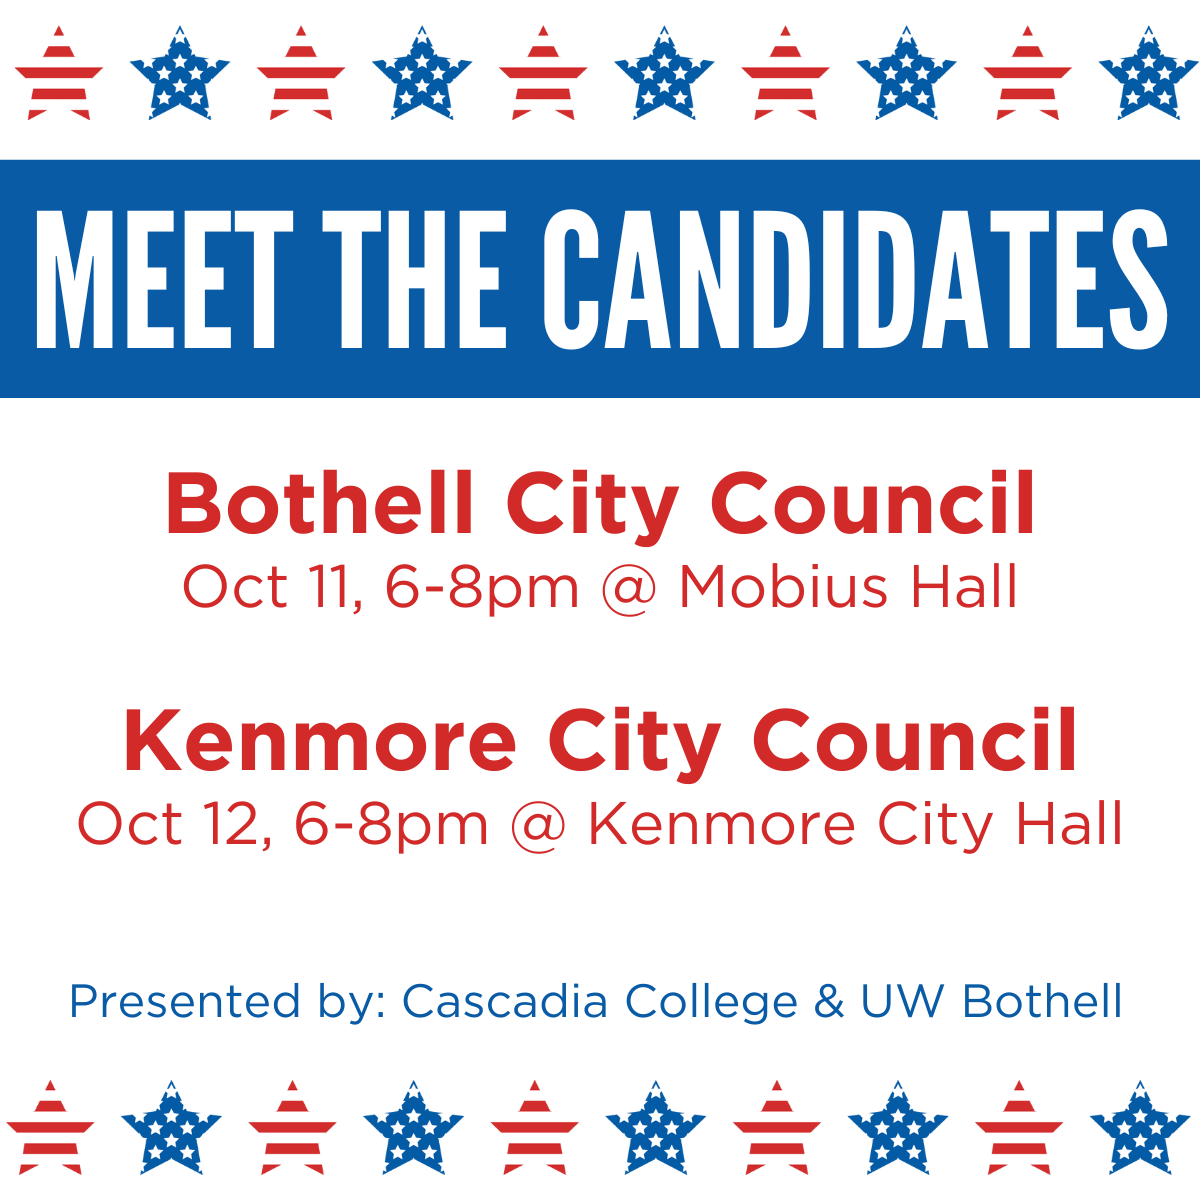 Kenmore City Council Candidate Forum  Thursday.  October 12th,  6:00 PM - 8:00 PM,  Located at Kenmore City Hall, 18120 68th Ave NE, Kenmore, WA 98028. Hosted by Cascadia College and UW Bothell